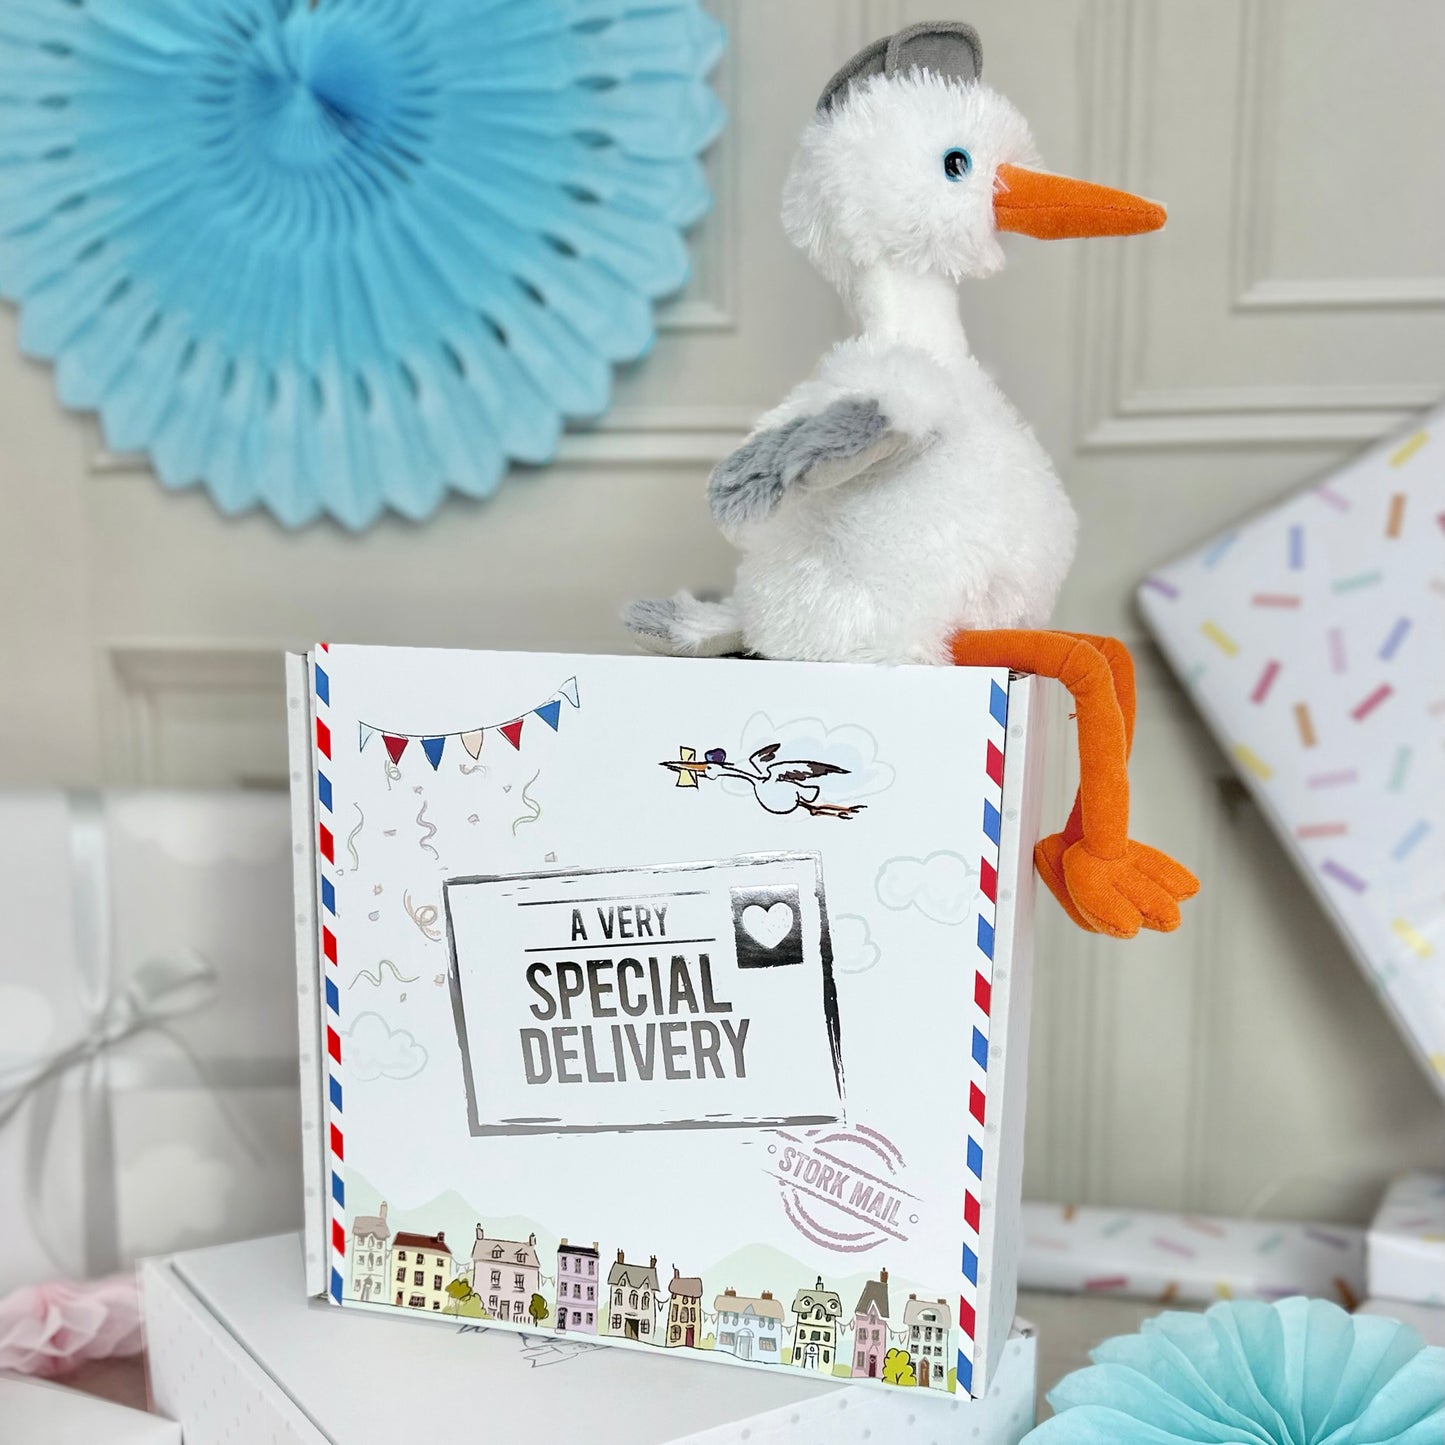 Mummy And Daddy To Be Cuddly Stork Gift Set